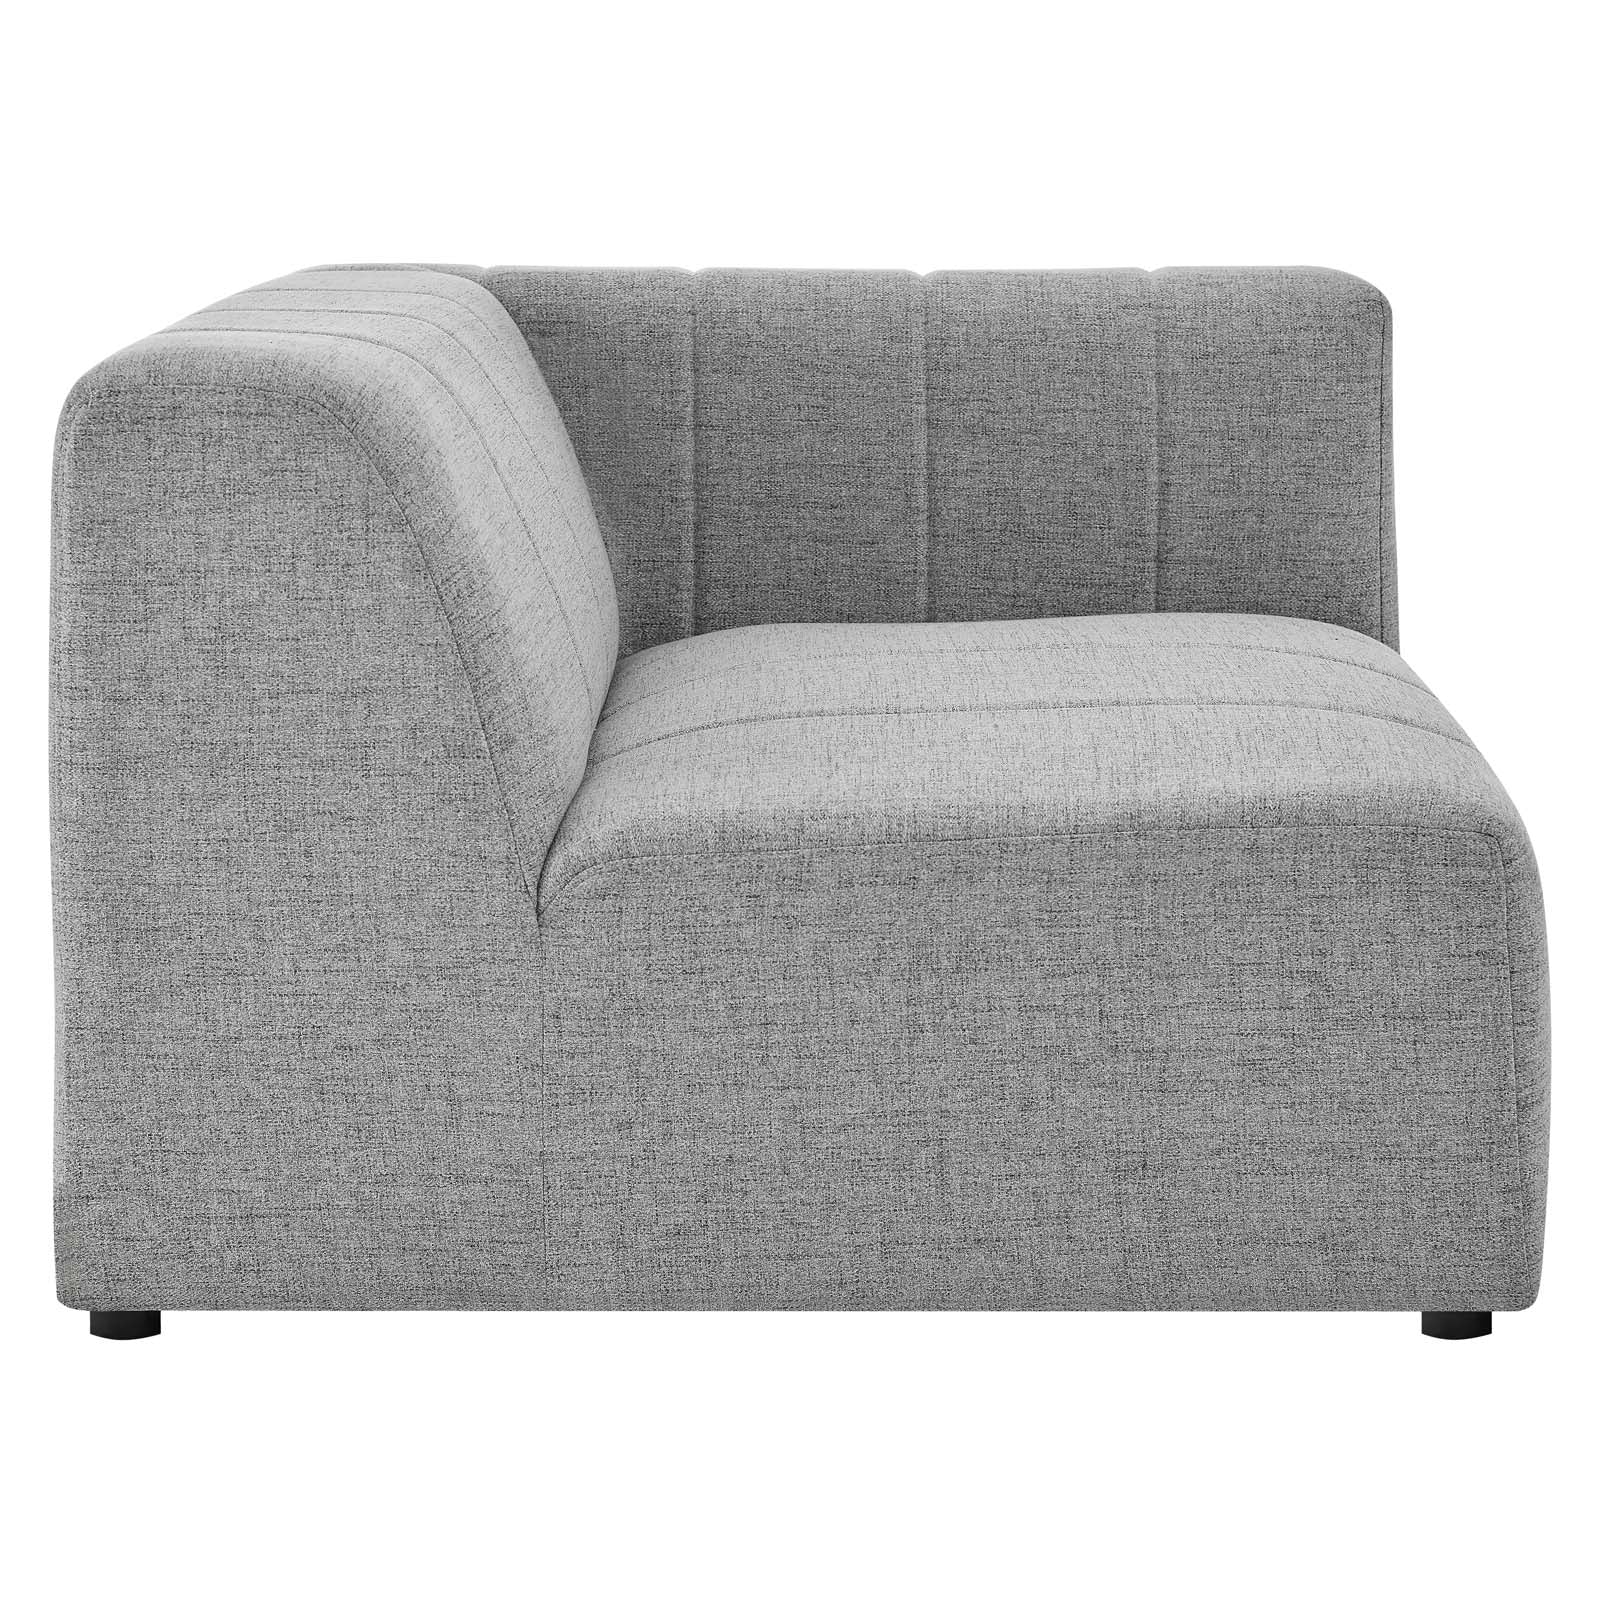 Modway Sectional Sofas - Bartlett Upholstered Fabric 6-Piece Sectional Sofa Light Gray